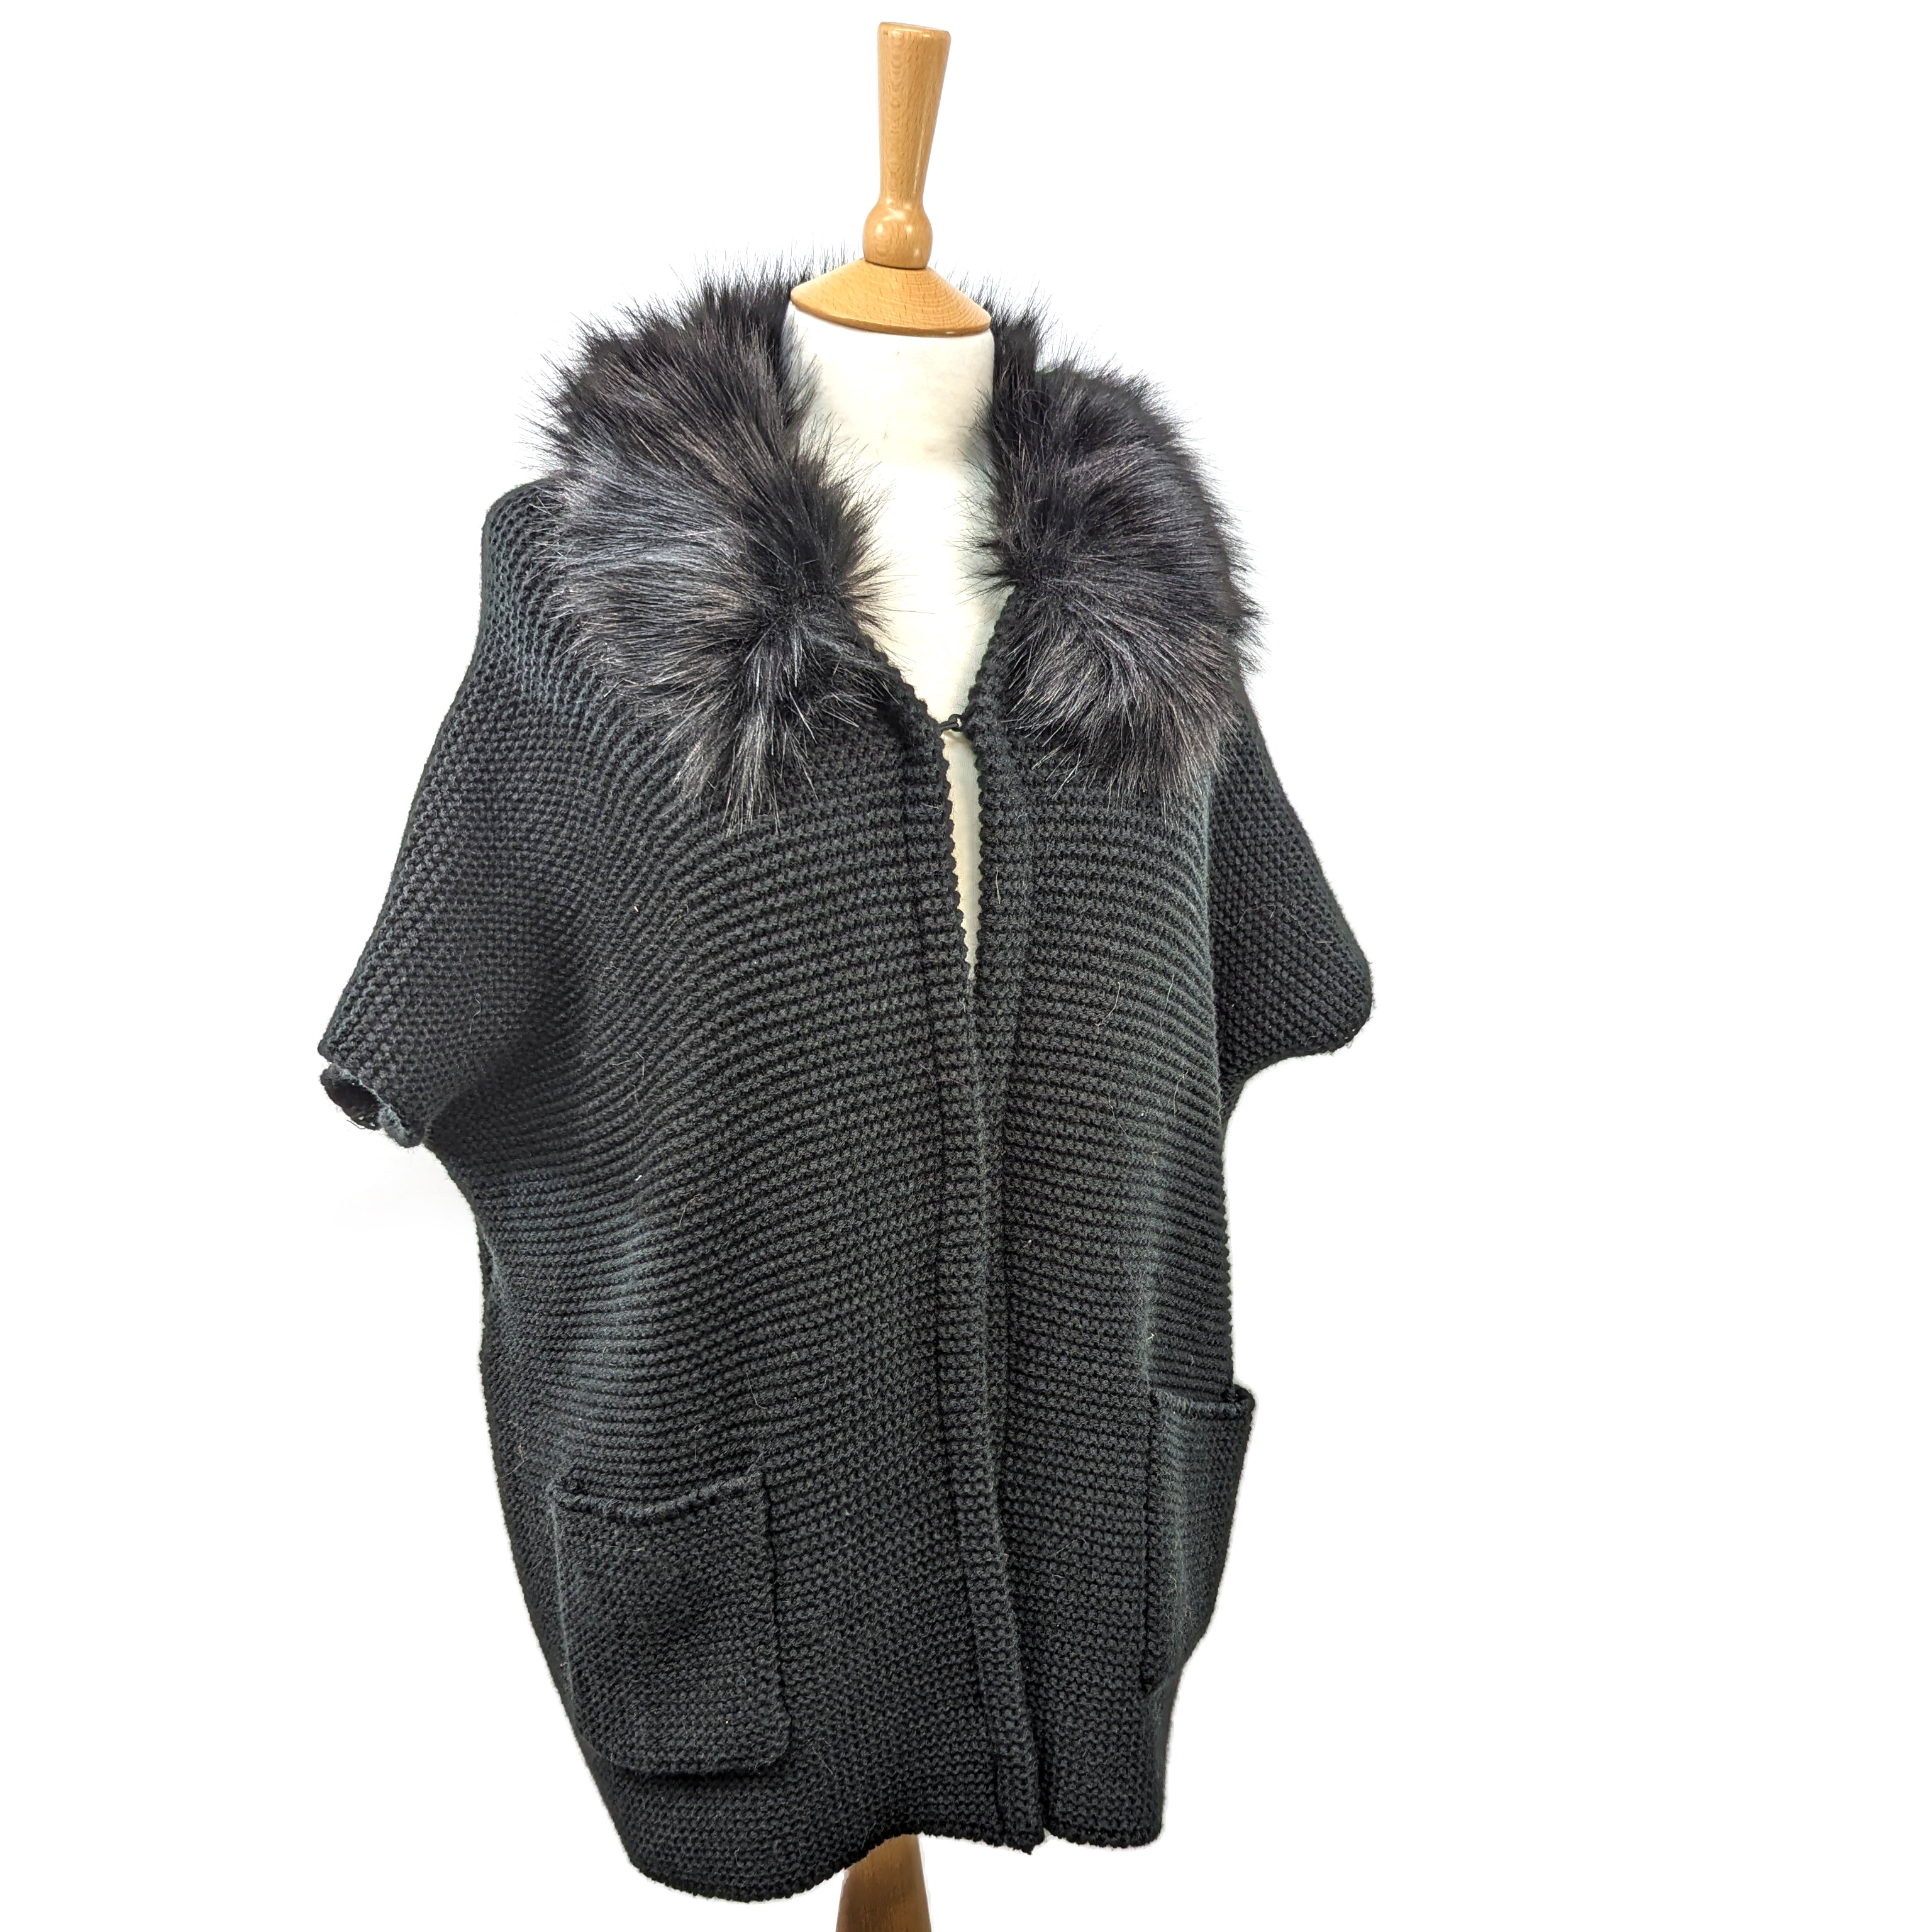 Knitted Jacket with Pockets and Faux Fur Collar - Black